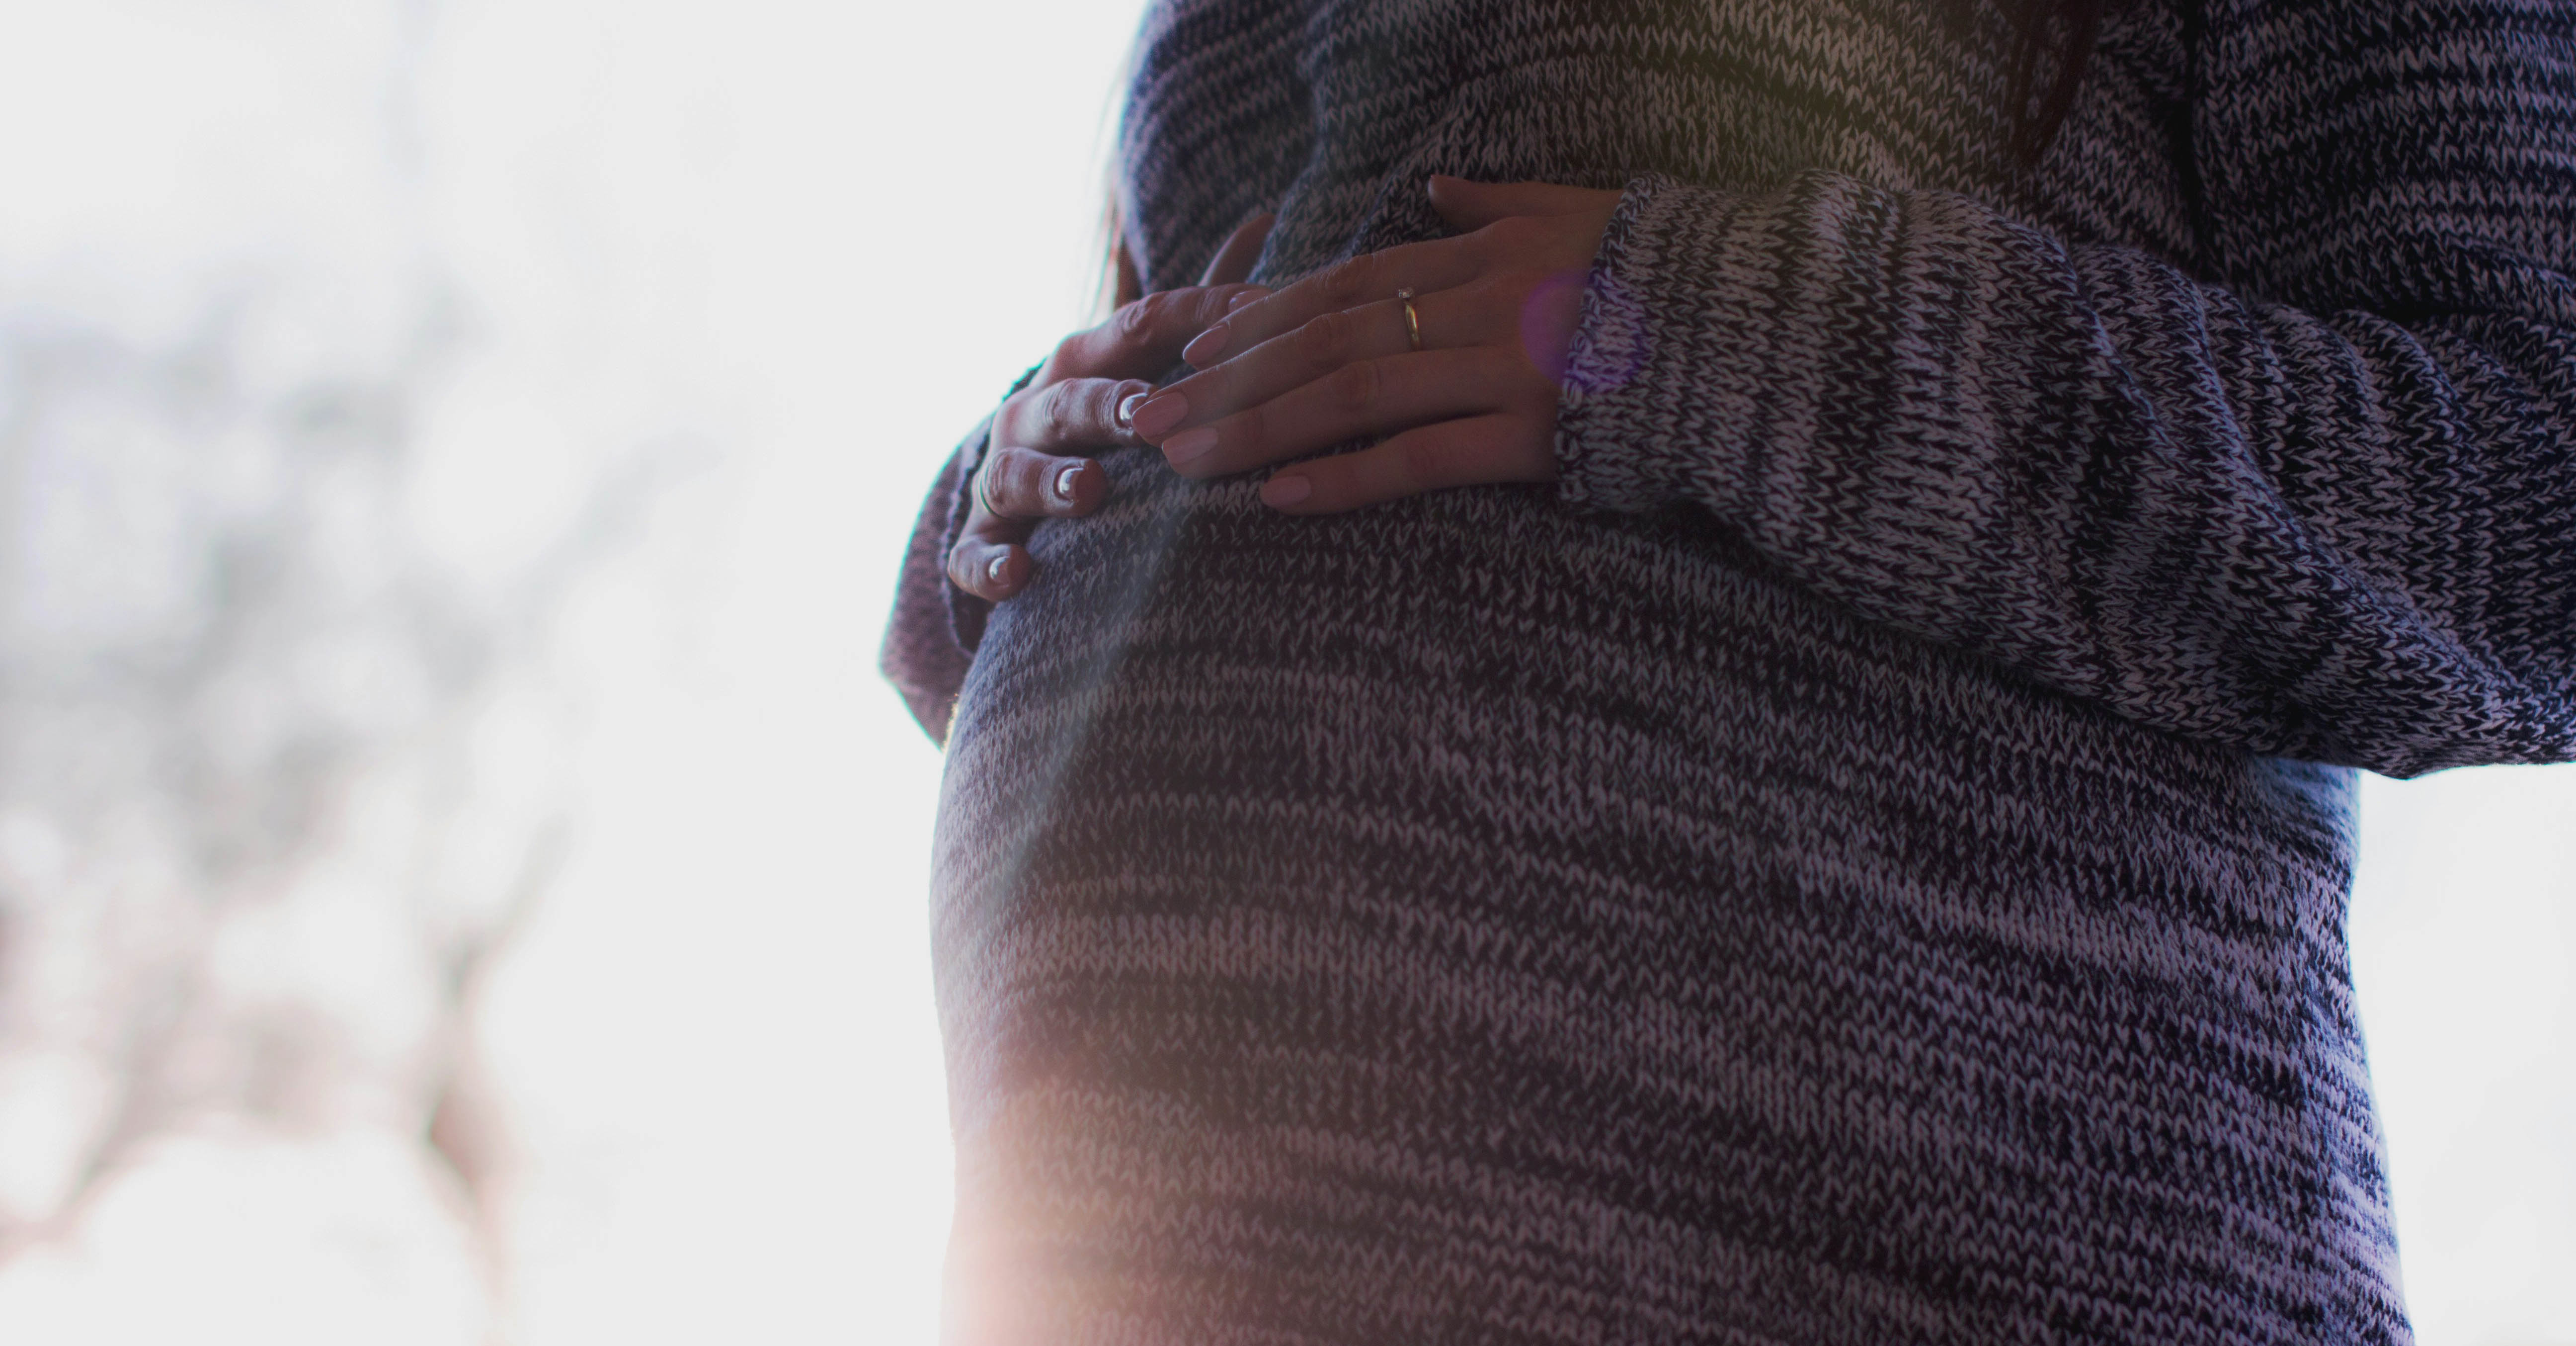 A pregnant person puts their hands on their stomach.